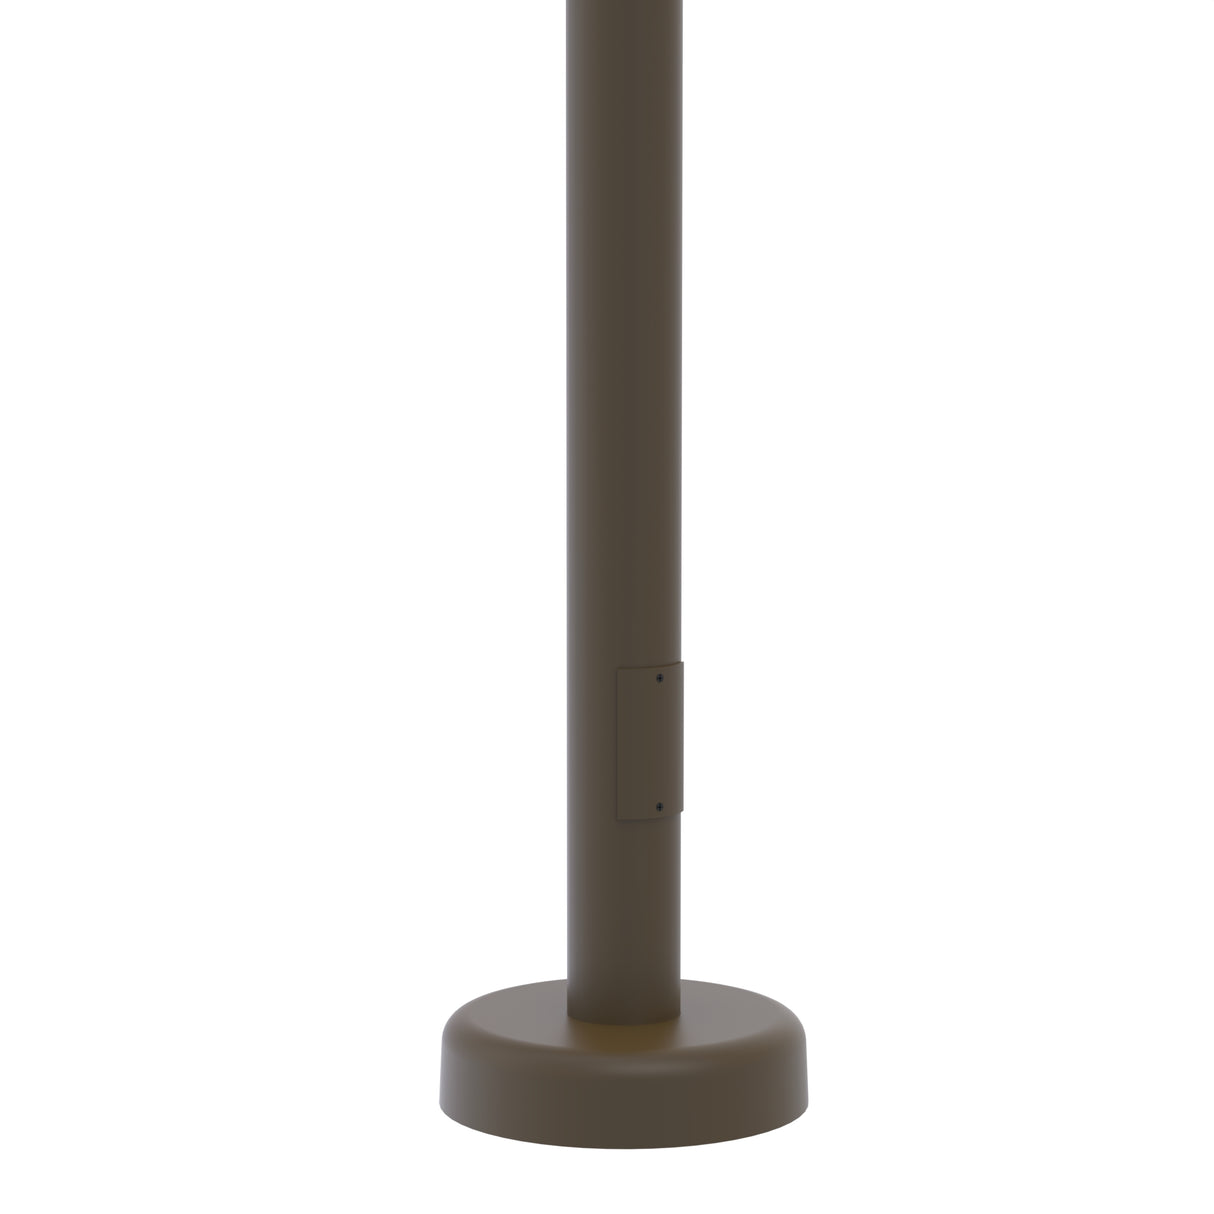 20' Tall x 5.0" OD x 0.156" Thick, Round Straight Aluminum, Hinged Anchor Base Light Pole